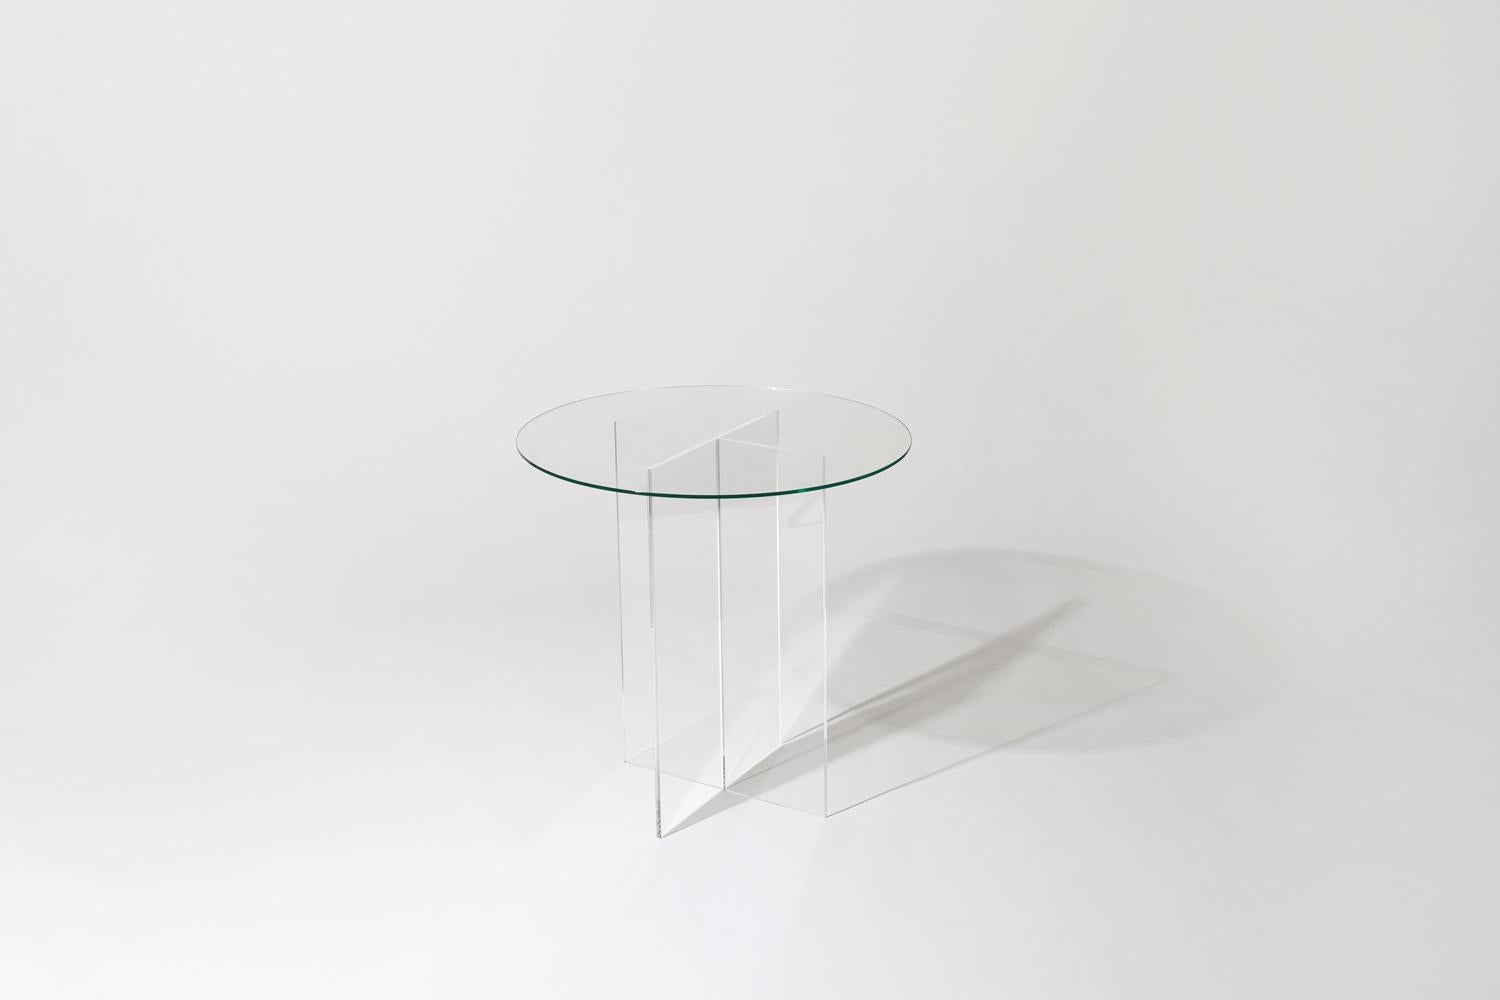 Made to order. Please allow 6 weeks for production.

The Section side table is designed with clear vertical structures that give the appearance of floating horizontal spans. The effect is subtle with all clear glass or can be accentuated with